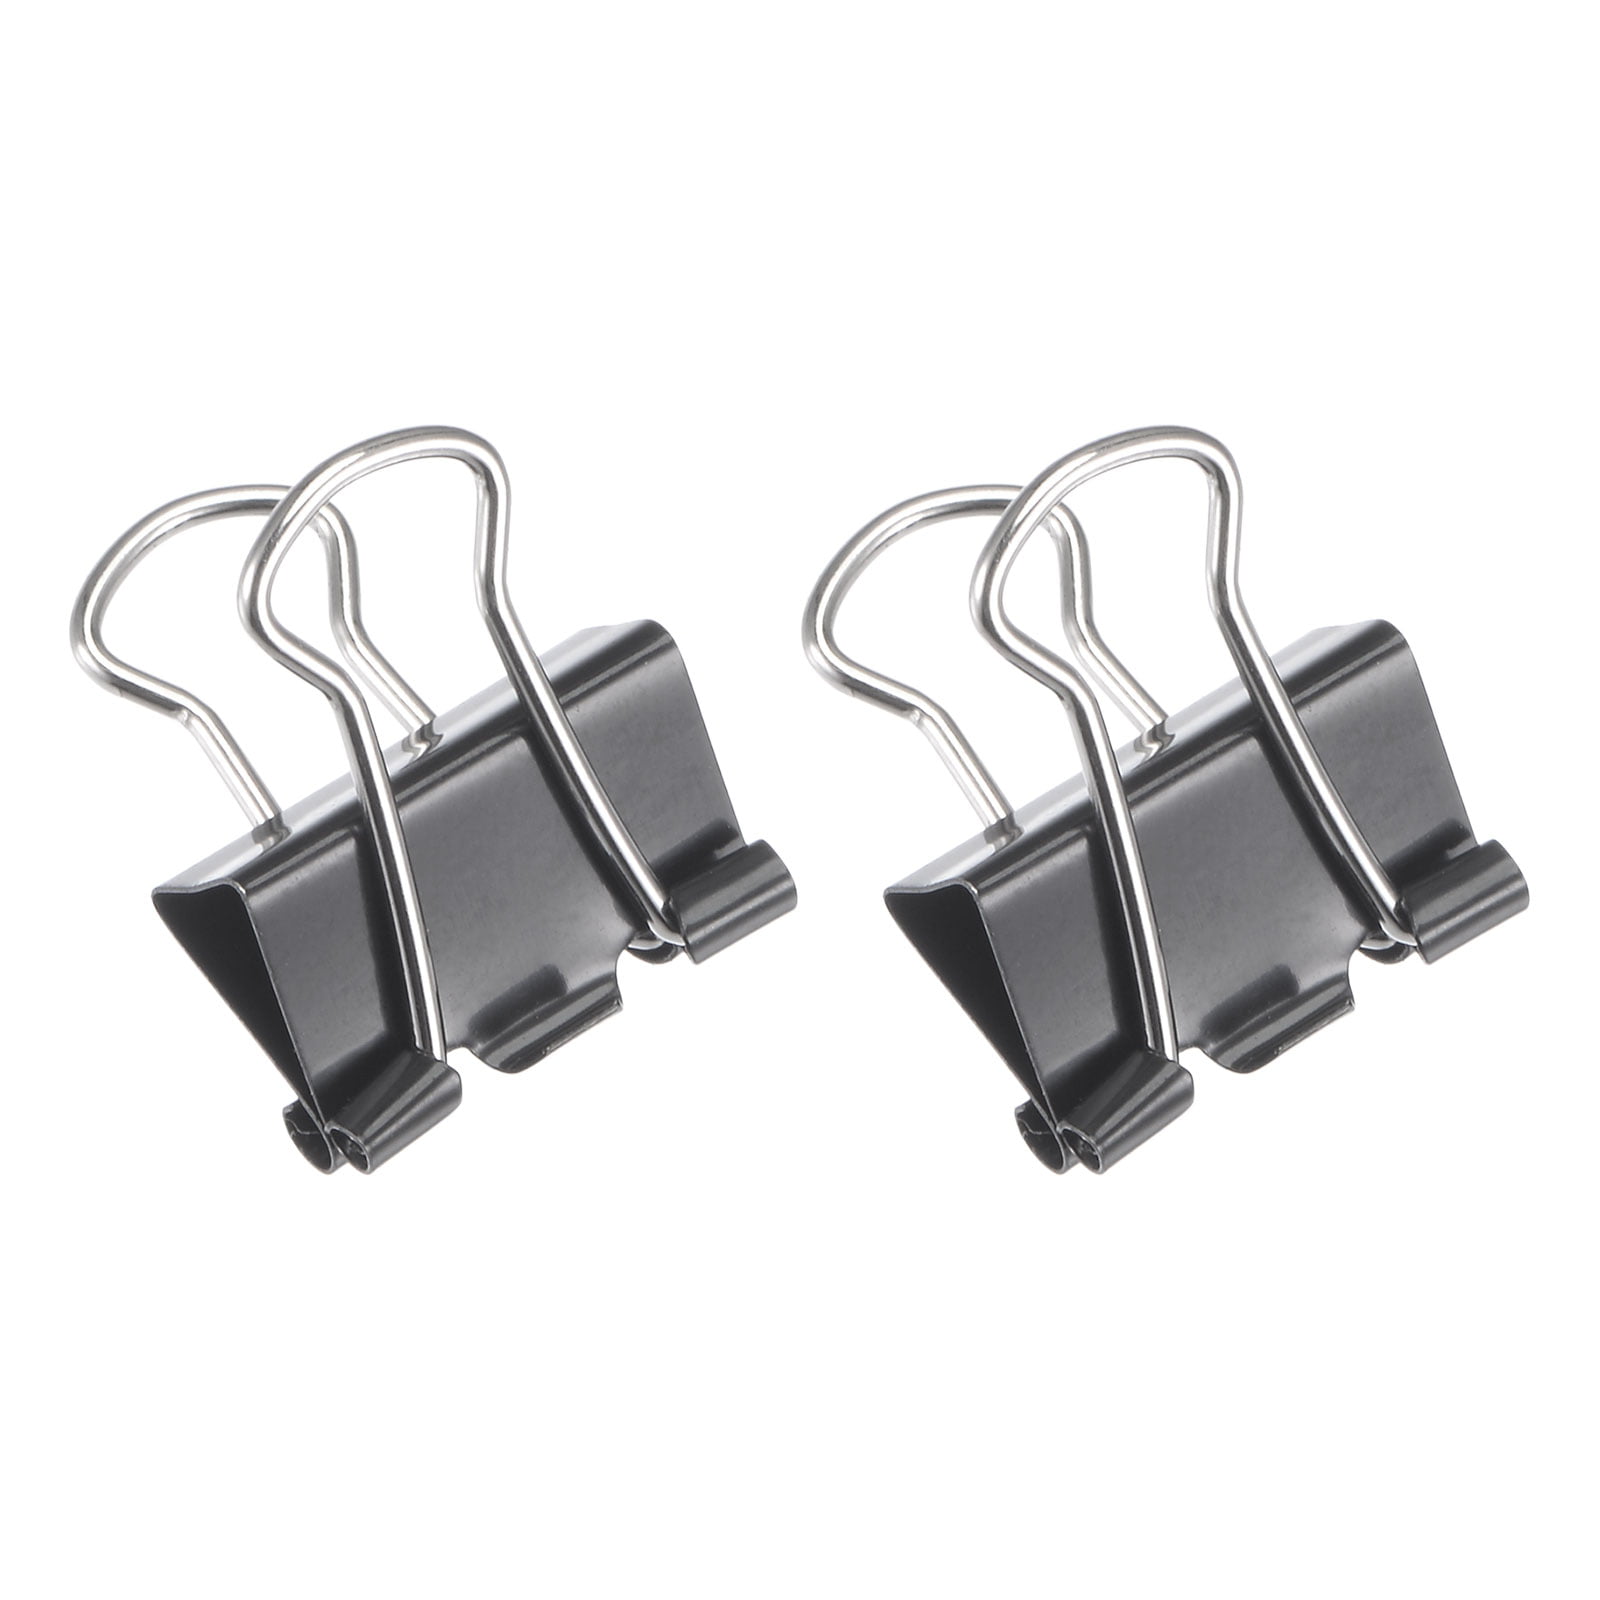 96 Pack Mini Binder Clips 3/4 Inch Small Black Paper Clamps For Office Supplies 